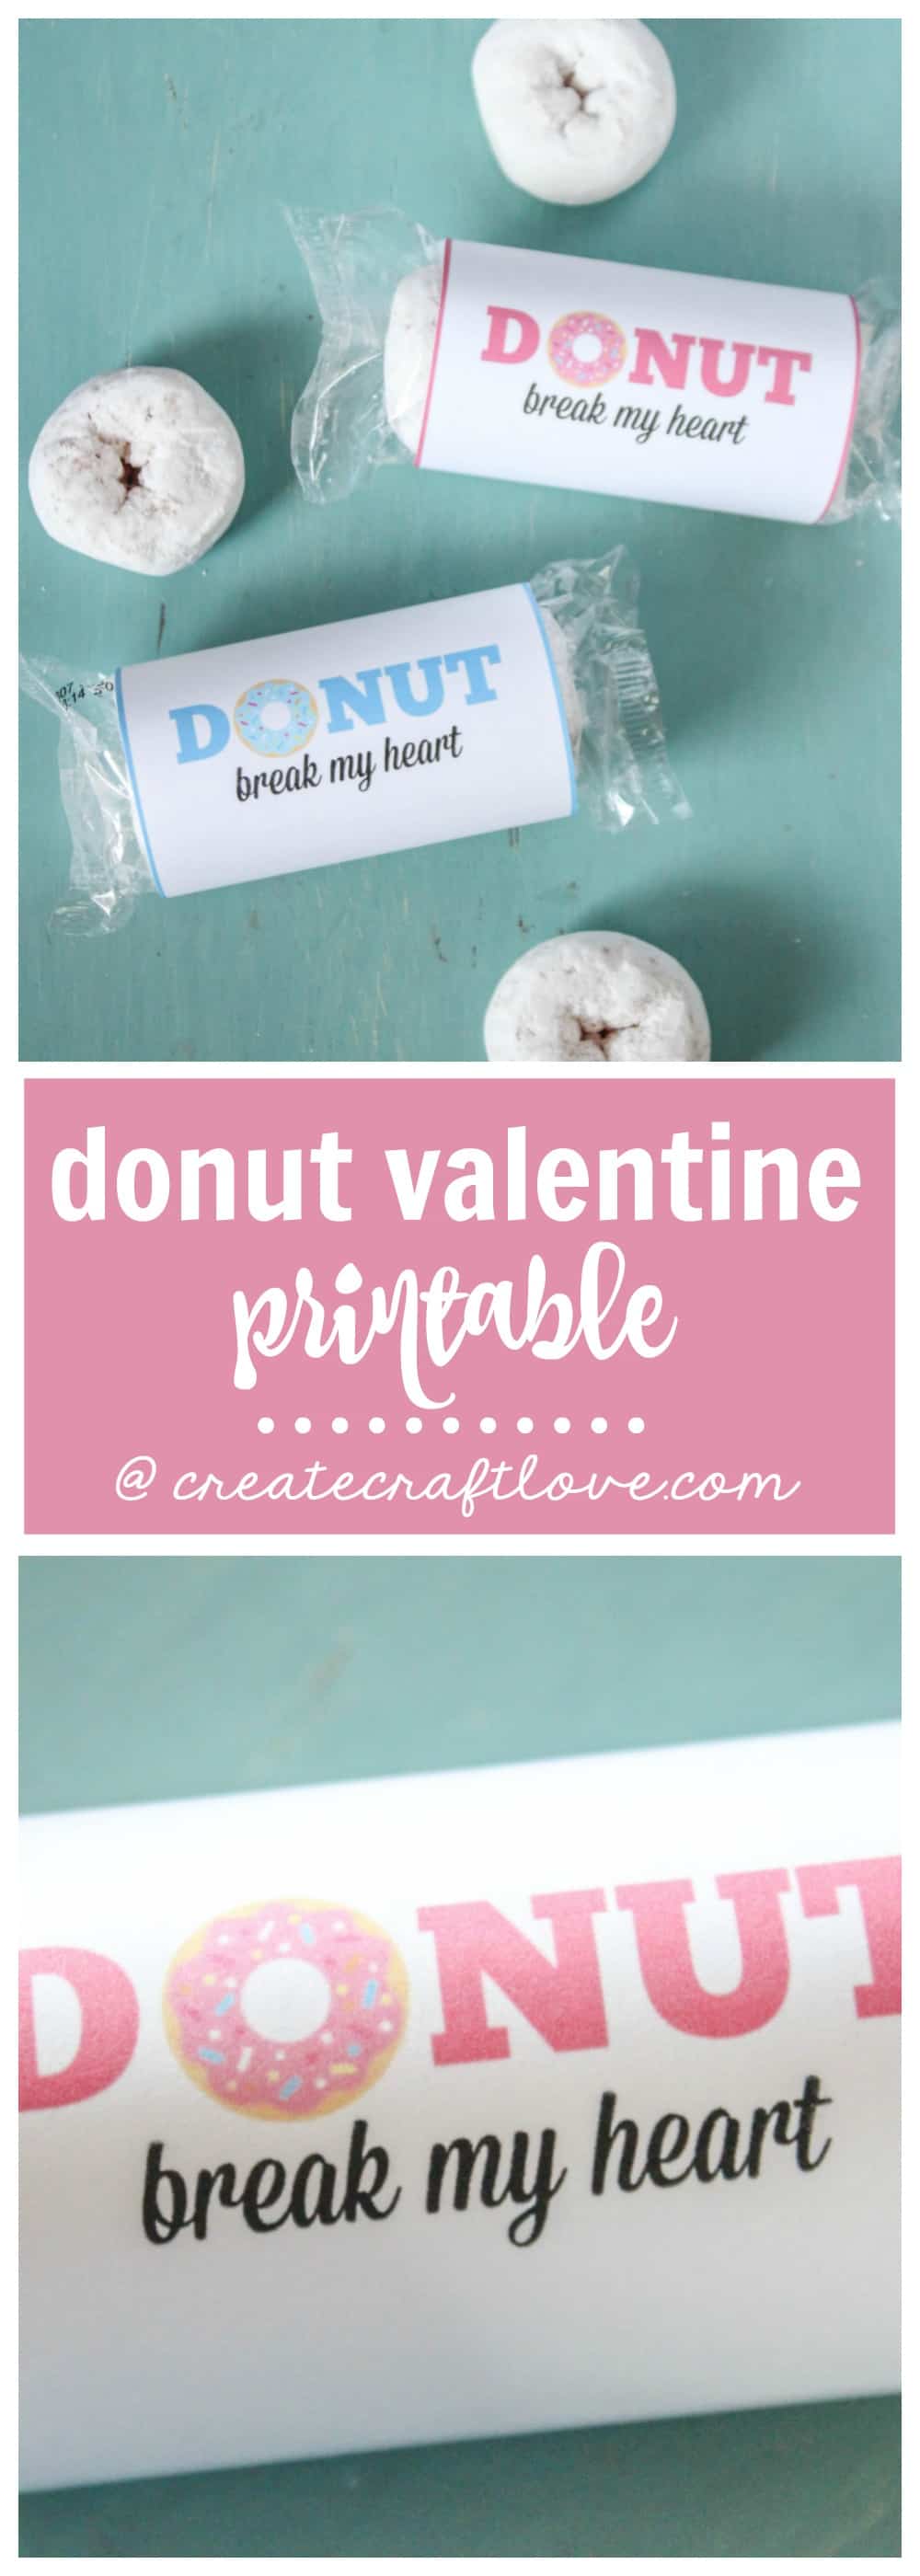 This Donut Valentine Printable is a great last minute idea for your V-Day classroom party! via createcraftlove.com